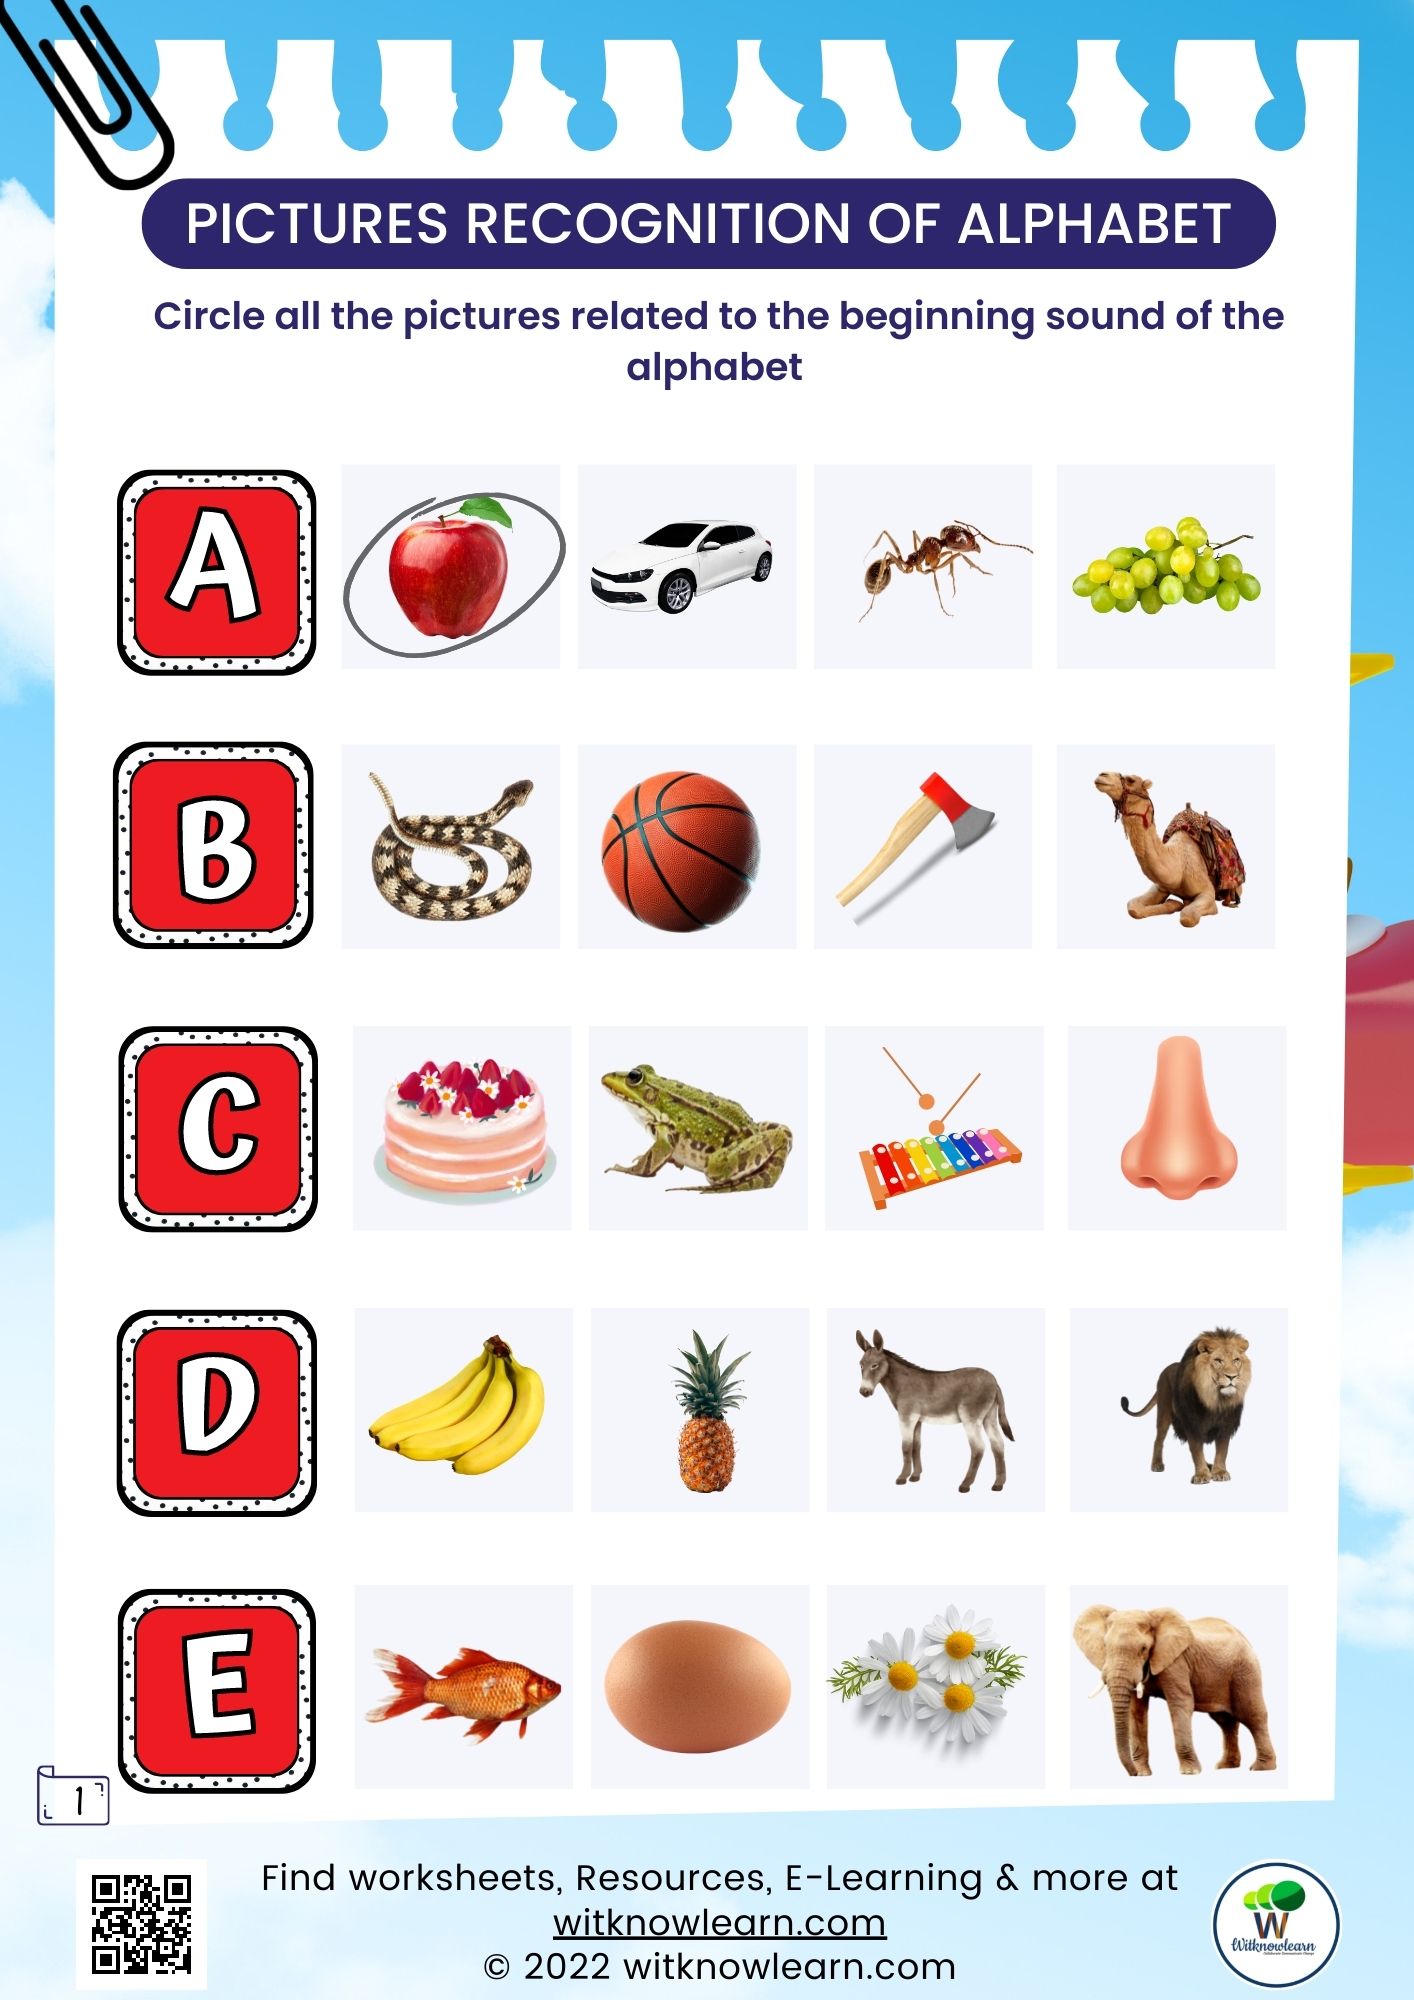 engage-your-child-with-these-nursery-matching-alphabets-with-pictures-worksheets-pdf